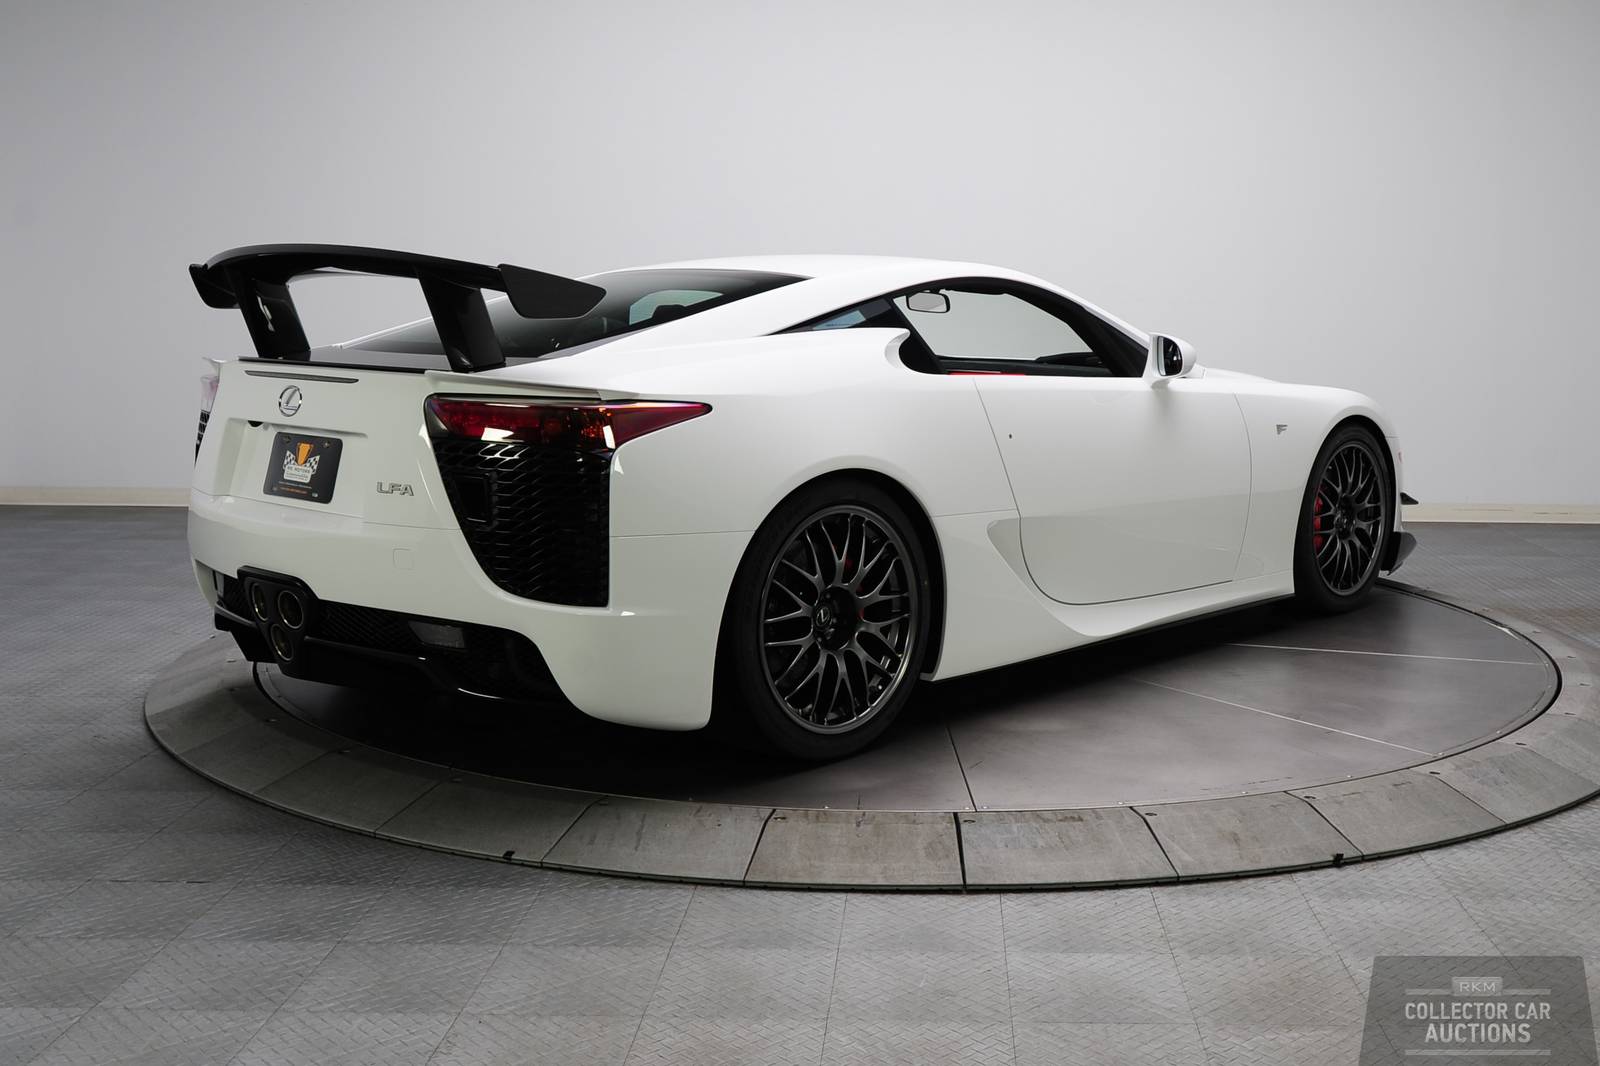 Lexus Lfa Nurburgring Edition Being Sold At Auction Without